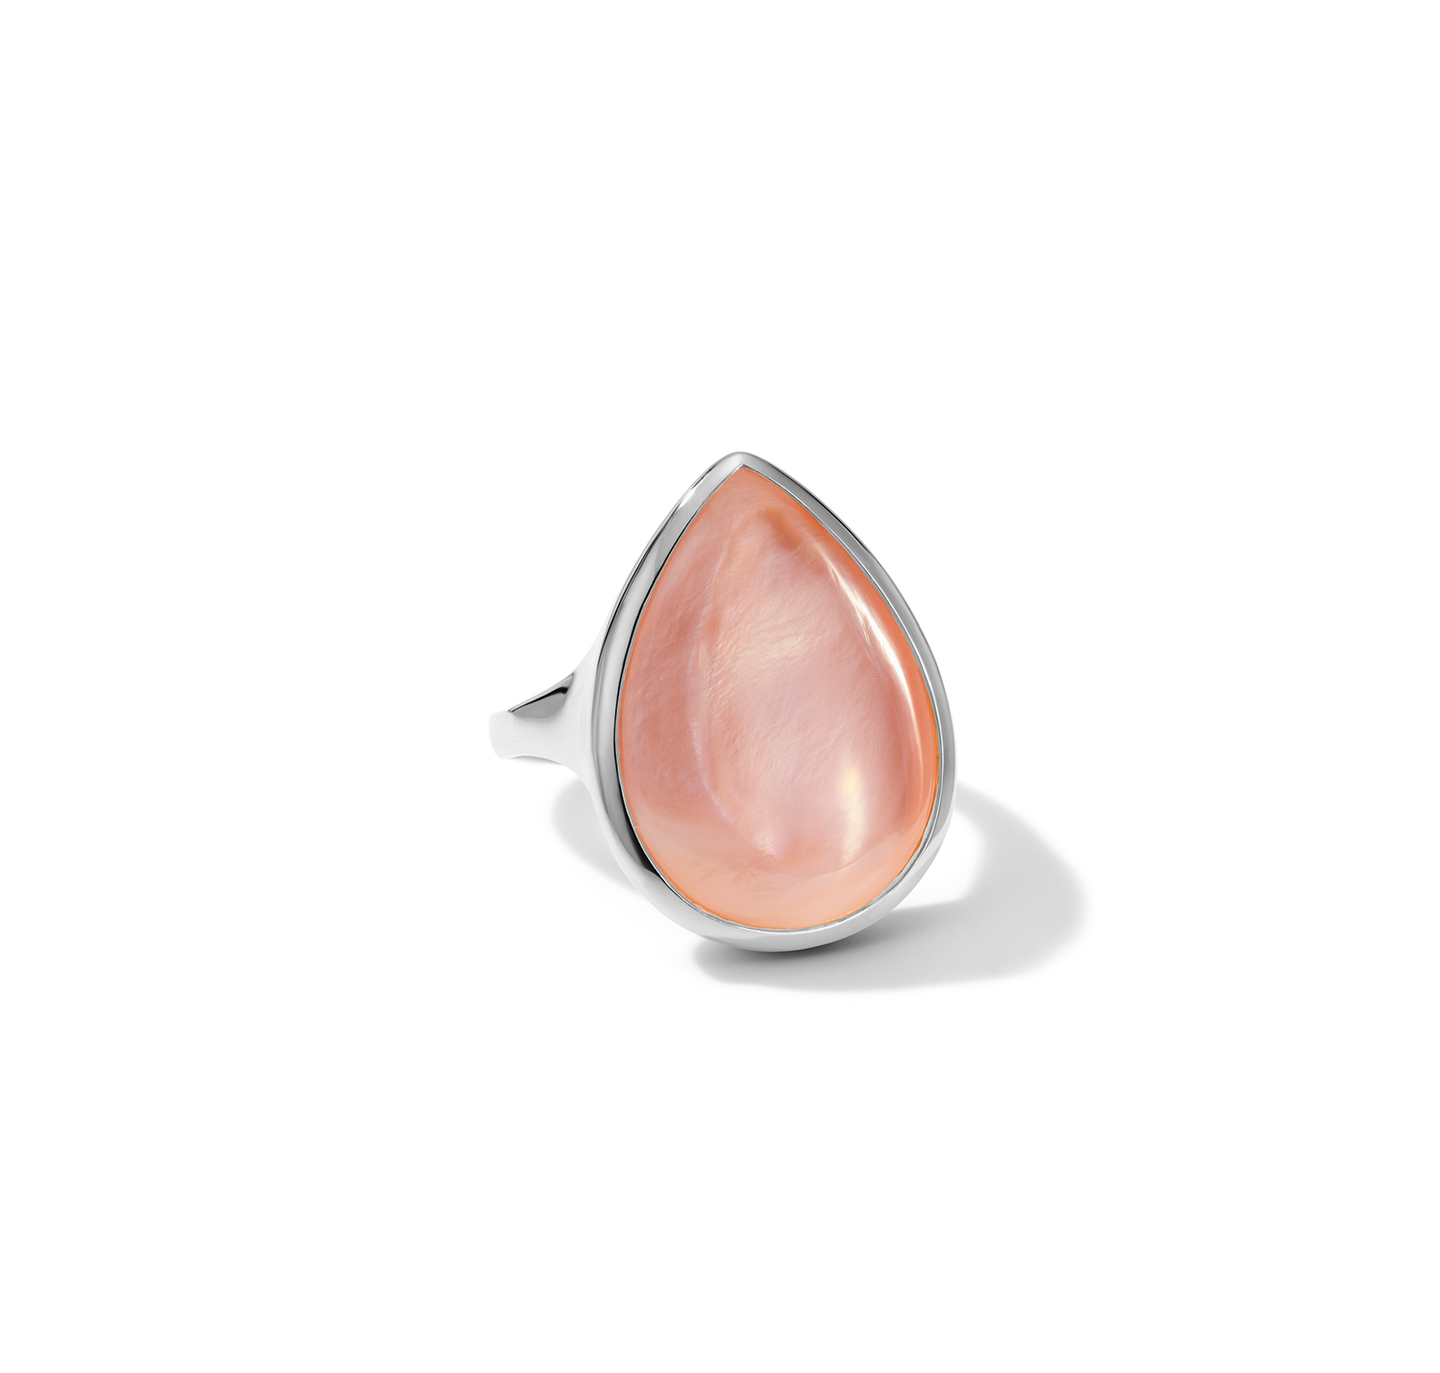 IPPOLITA Polished Rock Candy Sterling Silver Sculptured Teardrop Ring in Pink Shell